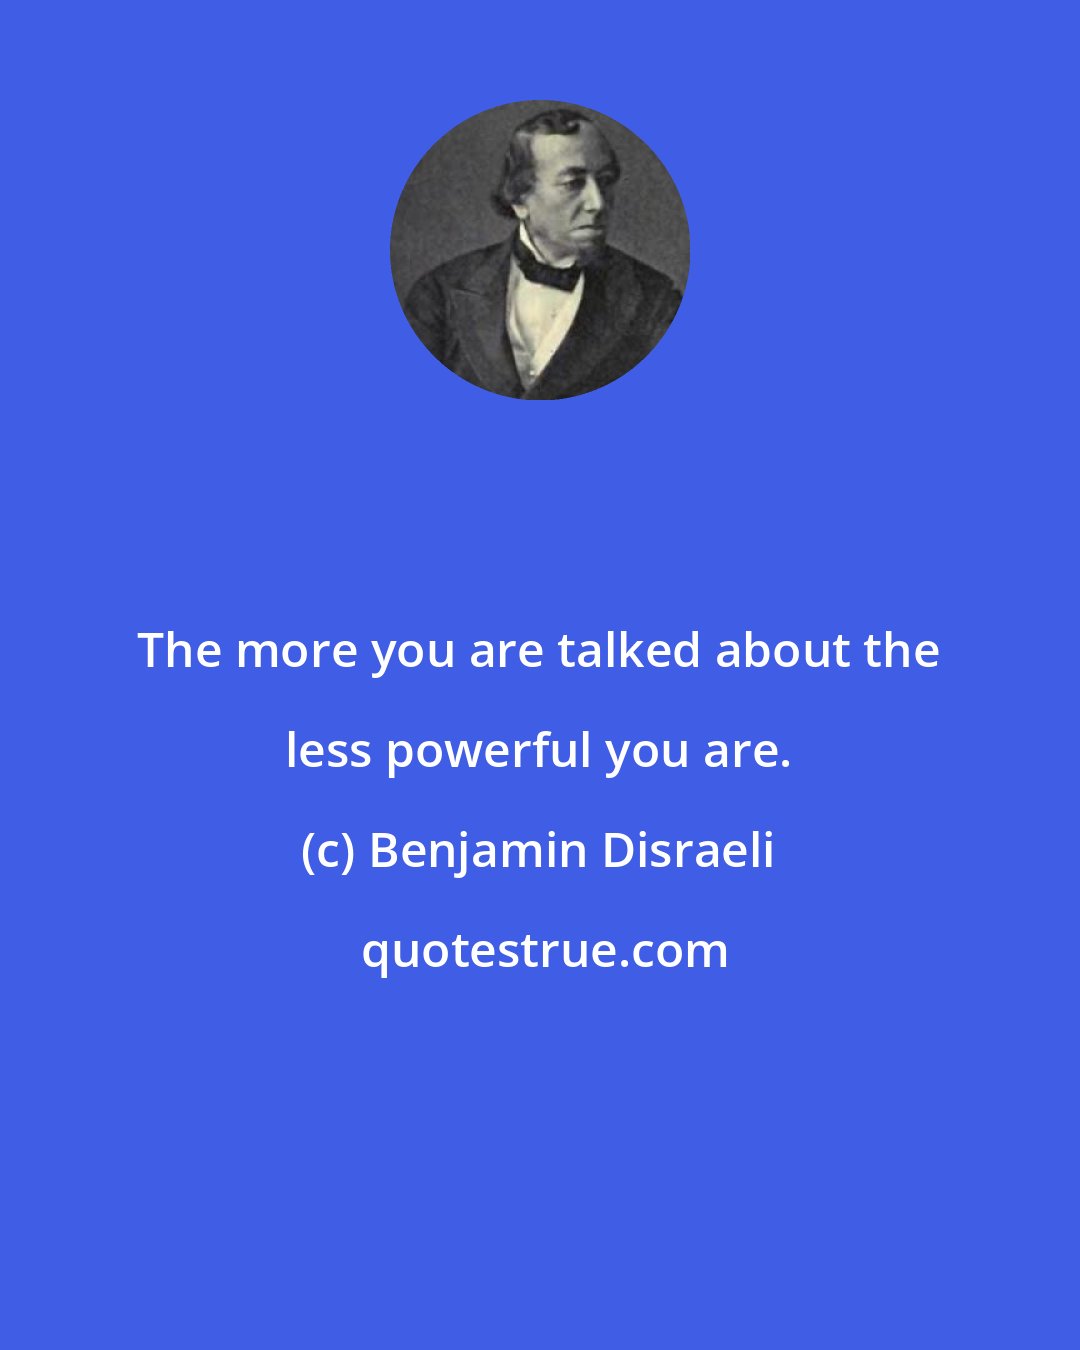 Benjamin Disraeli: The more you are talked about the less powerful you are.